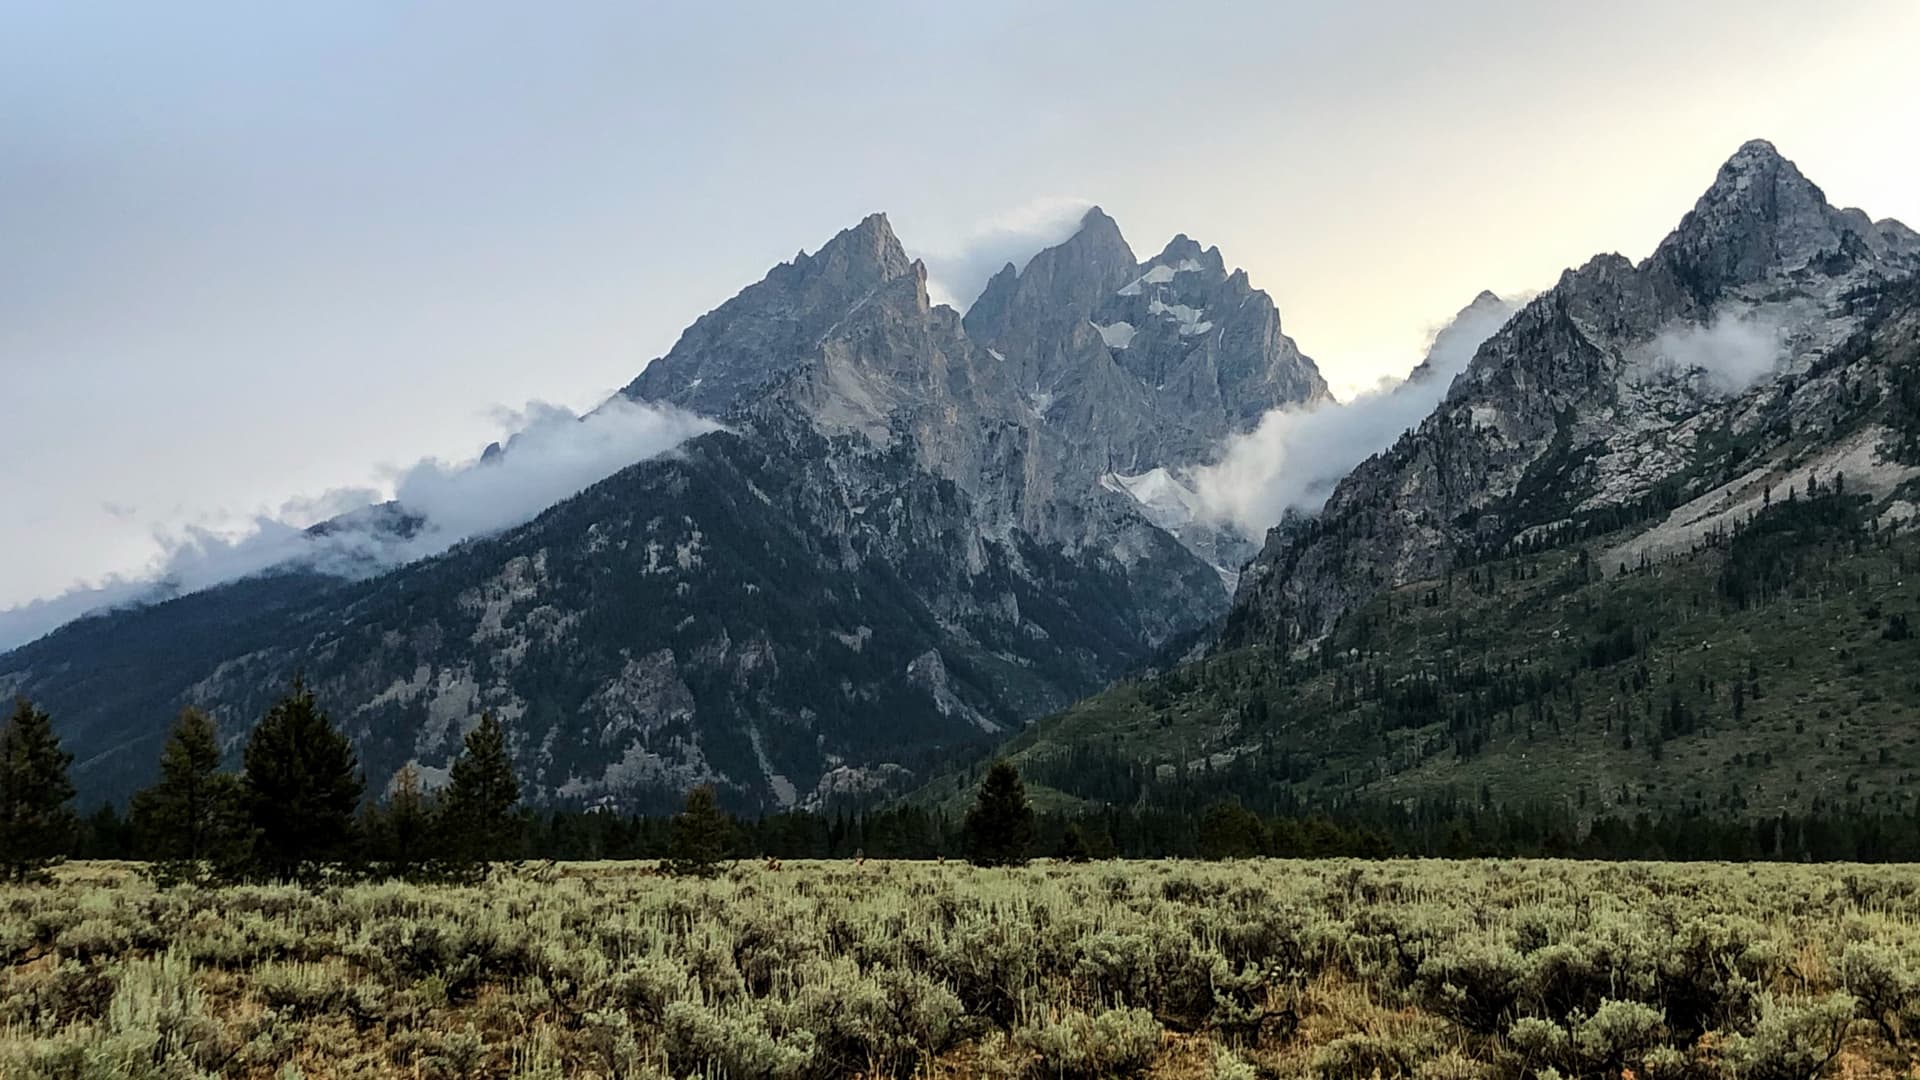 The Cathedral Group in Grand Teton National Park, Wyoming.